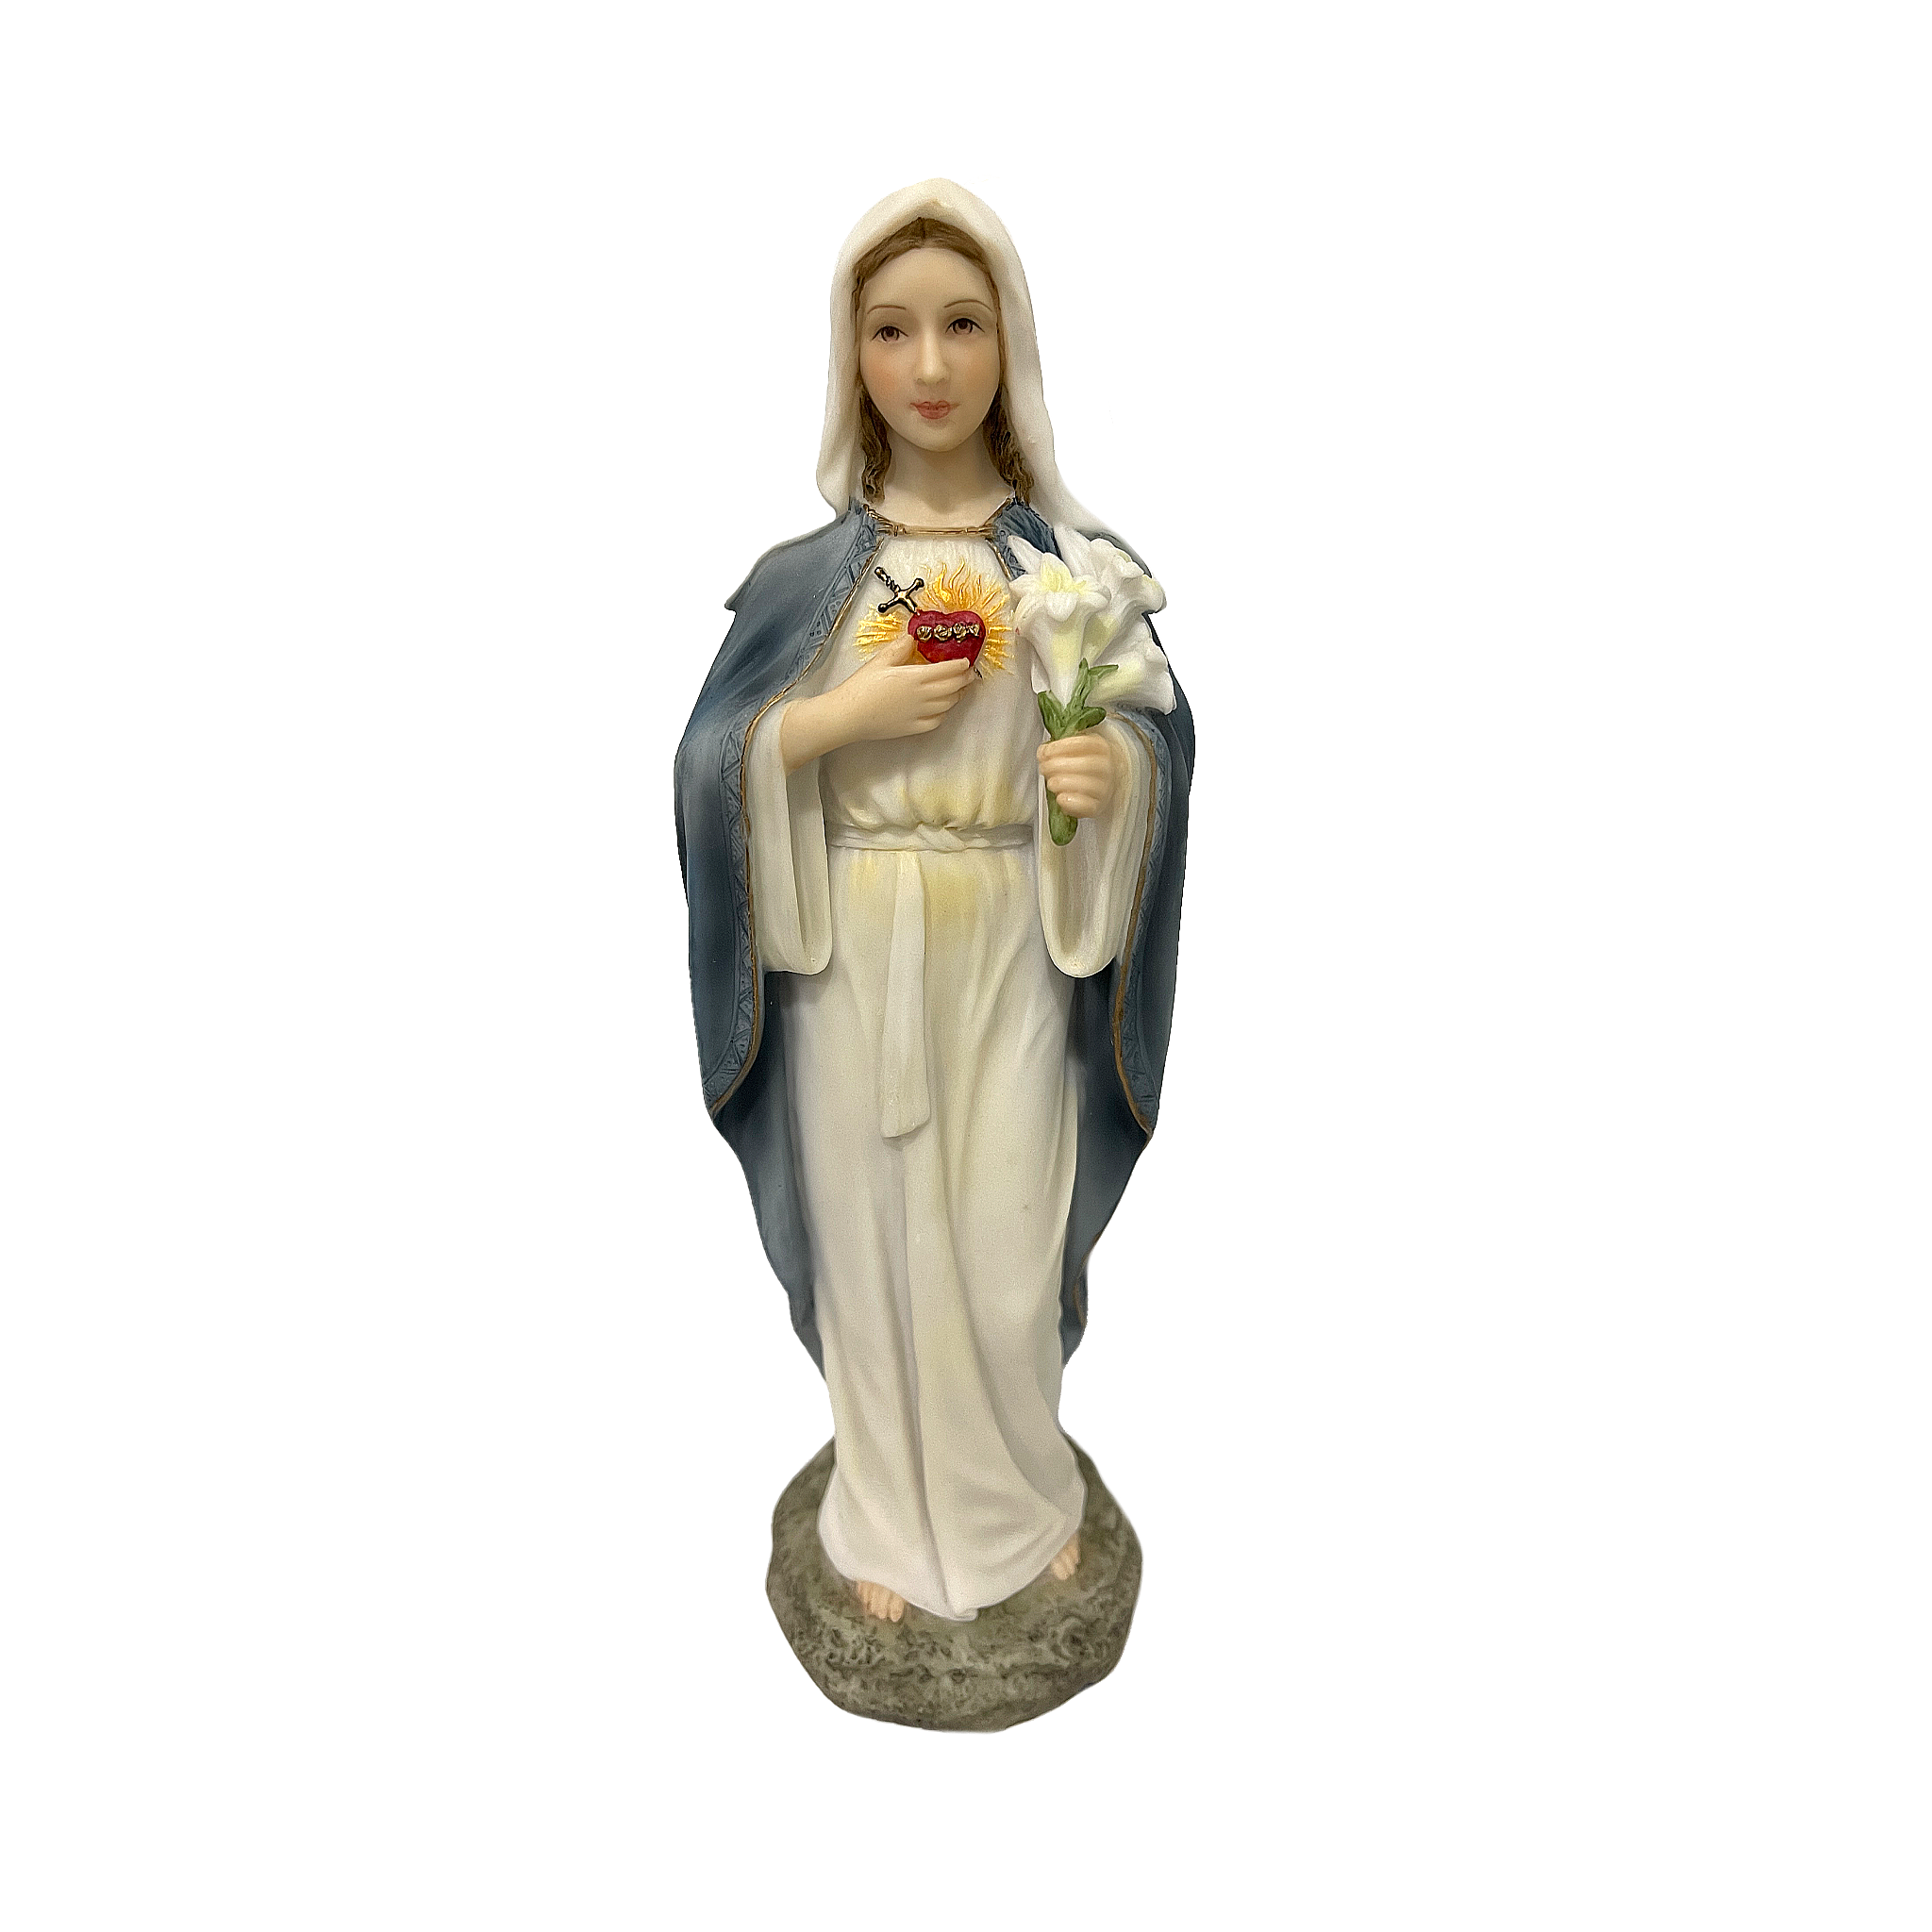 IMMACULATE HEART OF MARY 8" STATUE